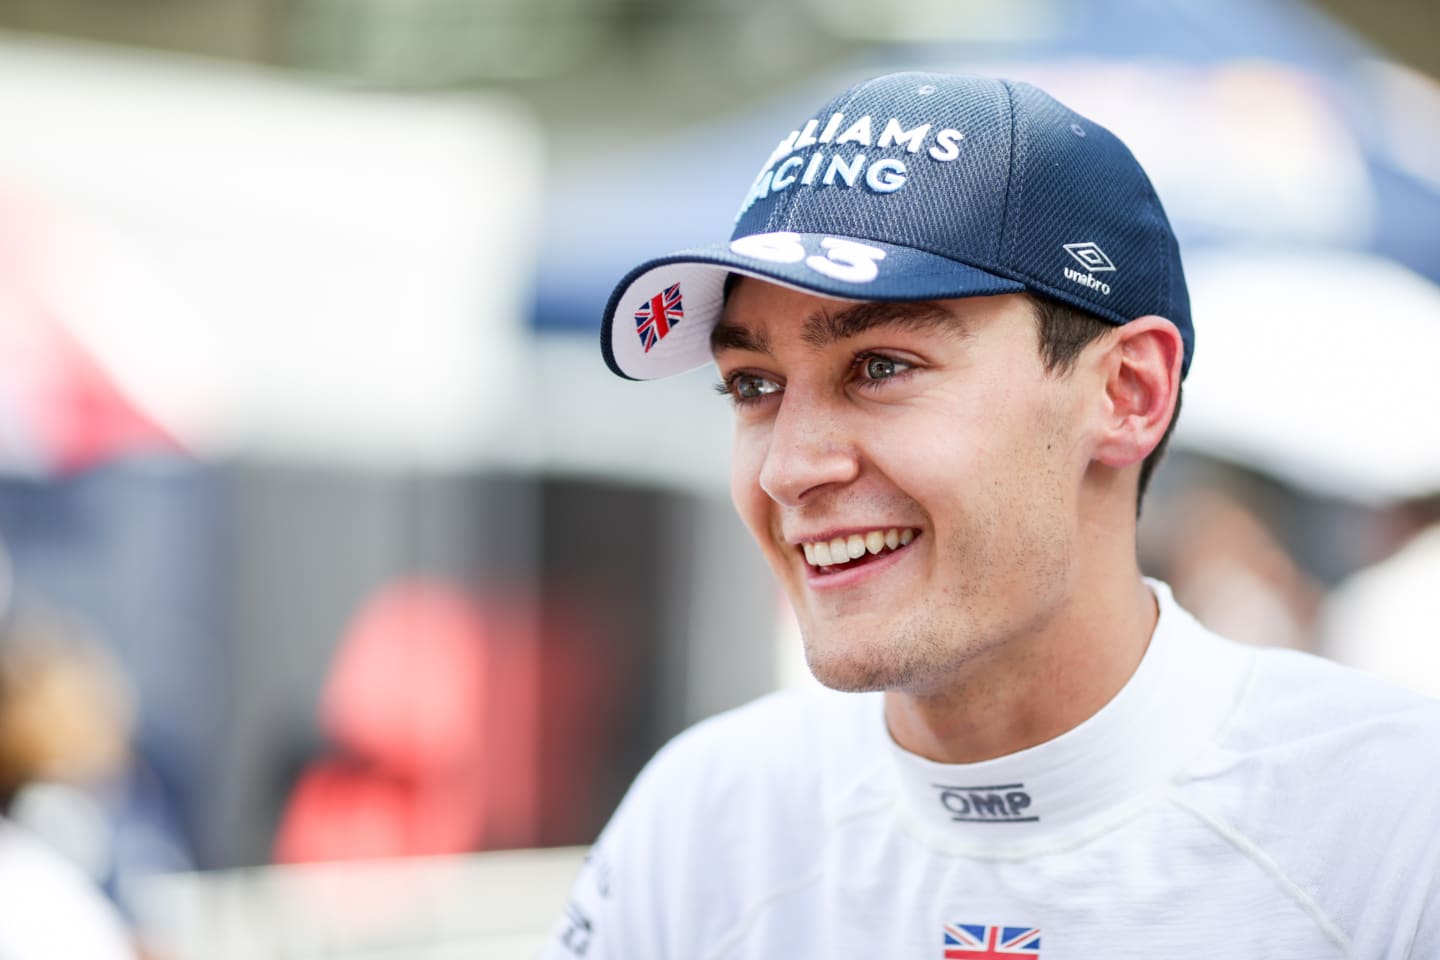 SPIELBERG, AUSTRIA - JULY 03: George Russell of Williams and Great Britain  during qualifying ahead